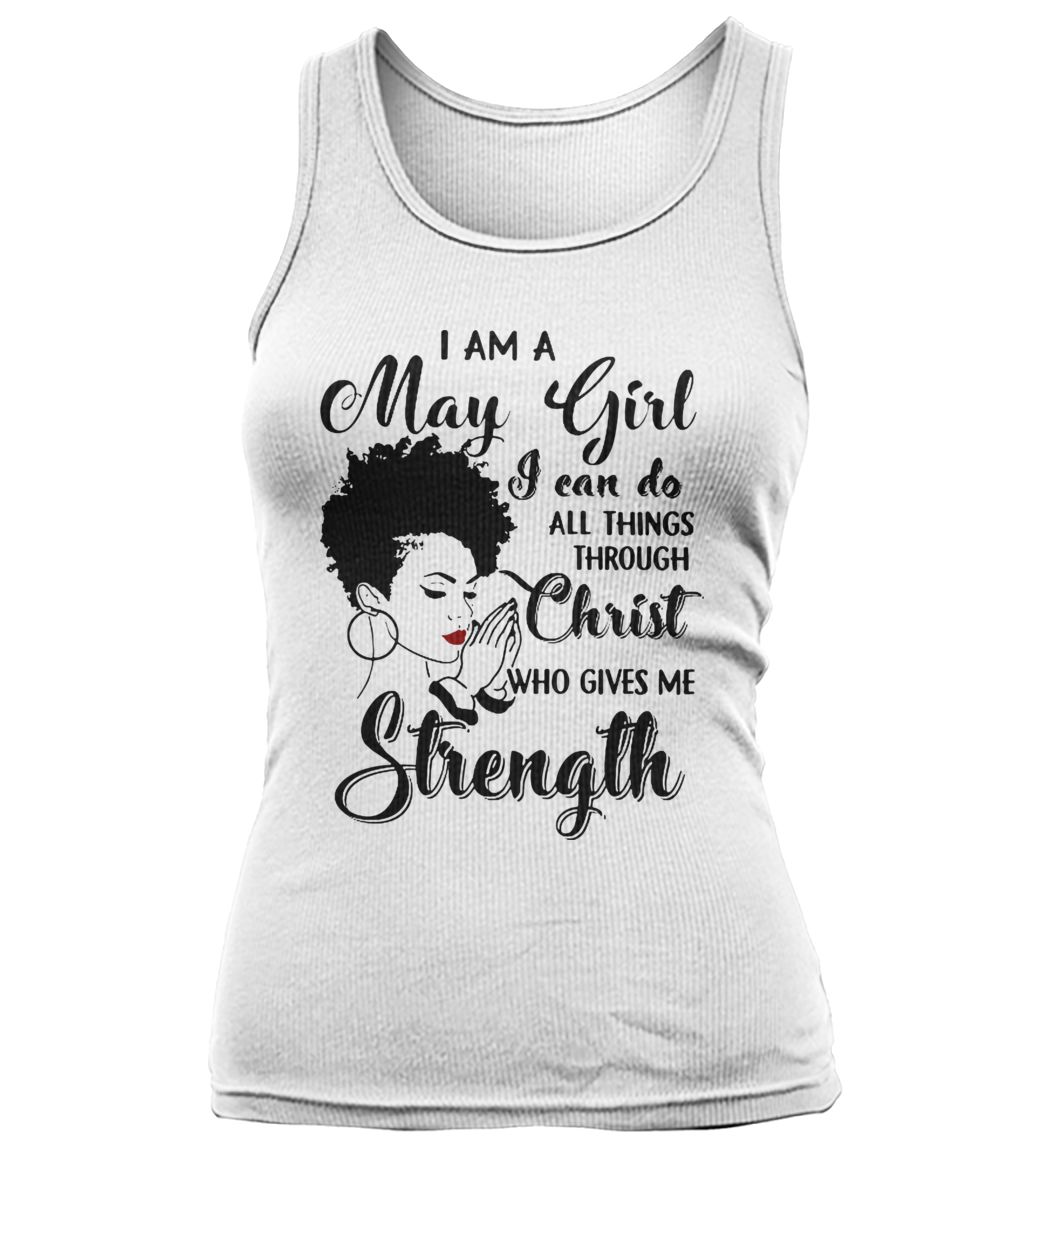 I am a may girl I can do all things through christ who gives me strength women's tank top